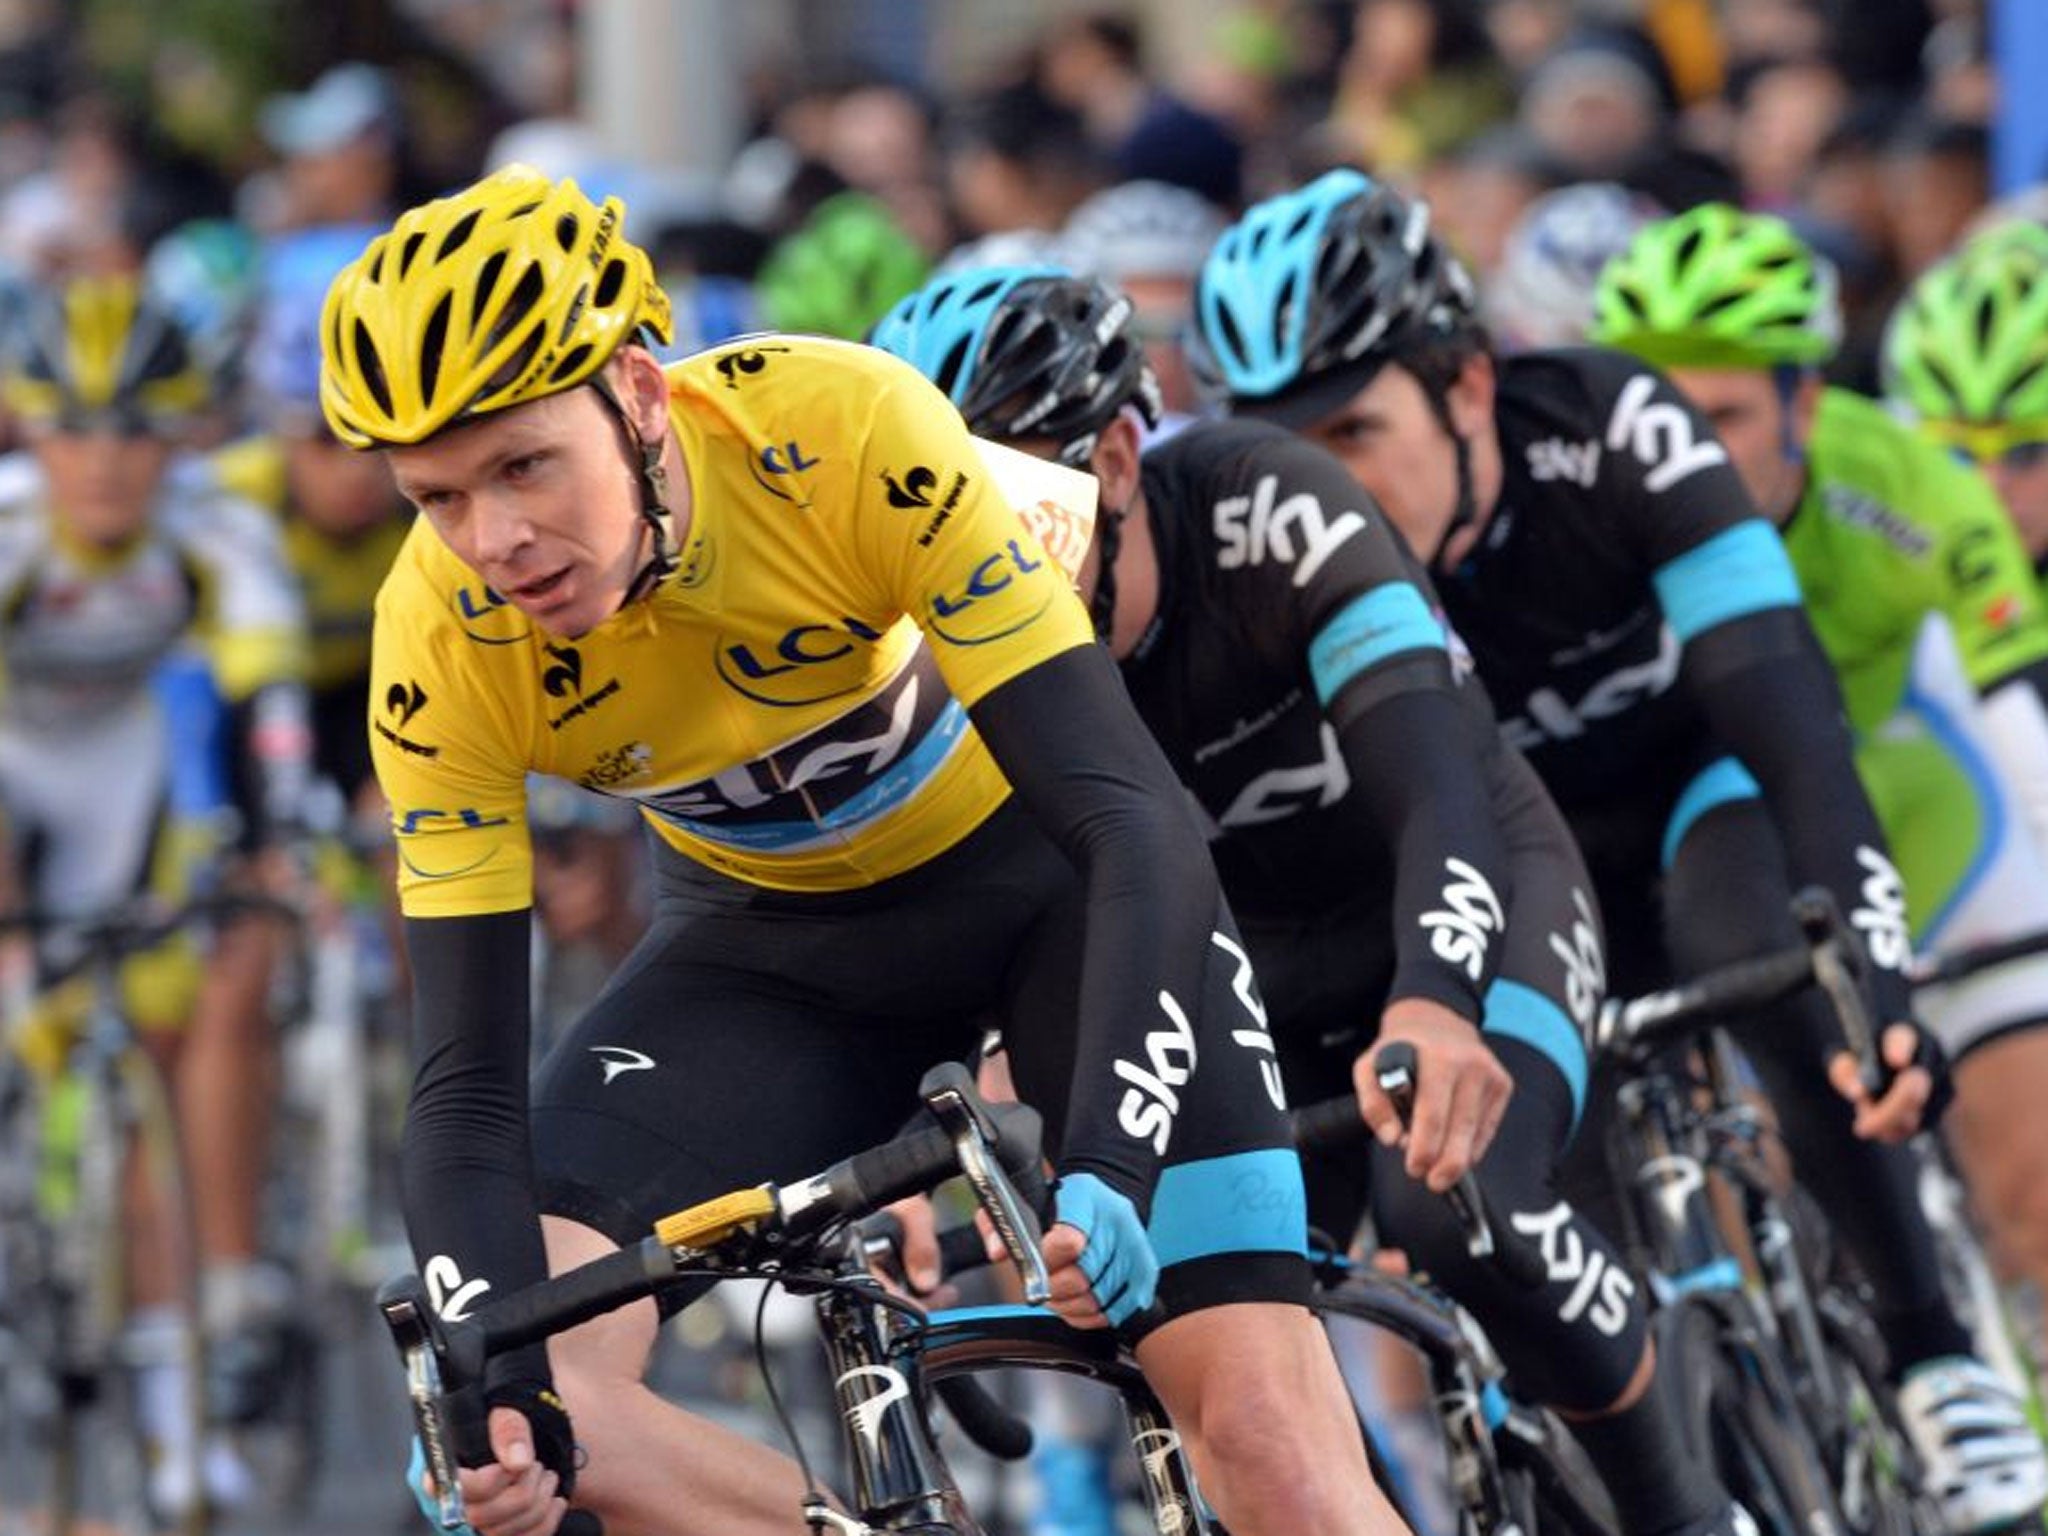 Hosting the Tour de France for two days in Yorkshire has left the organisers with a potential £2.3 million black hole